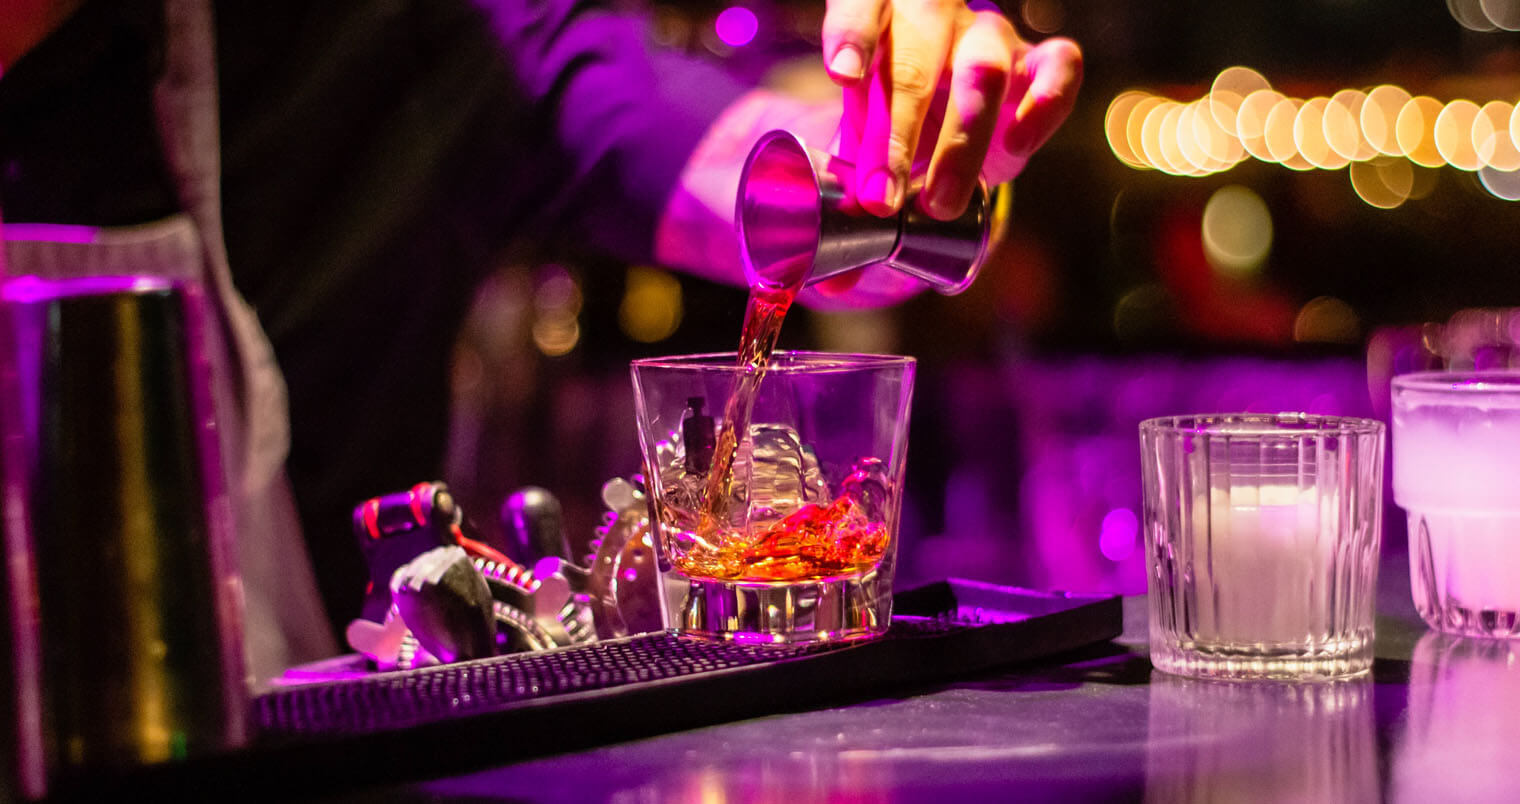 Bartender mixing a drink, featured image